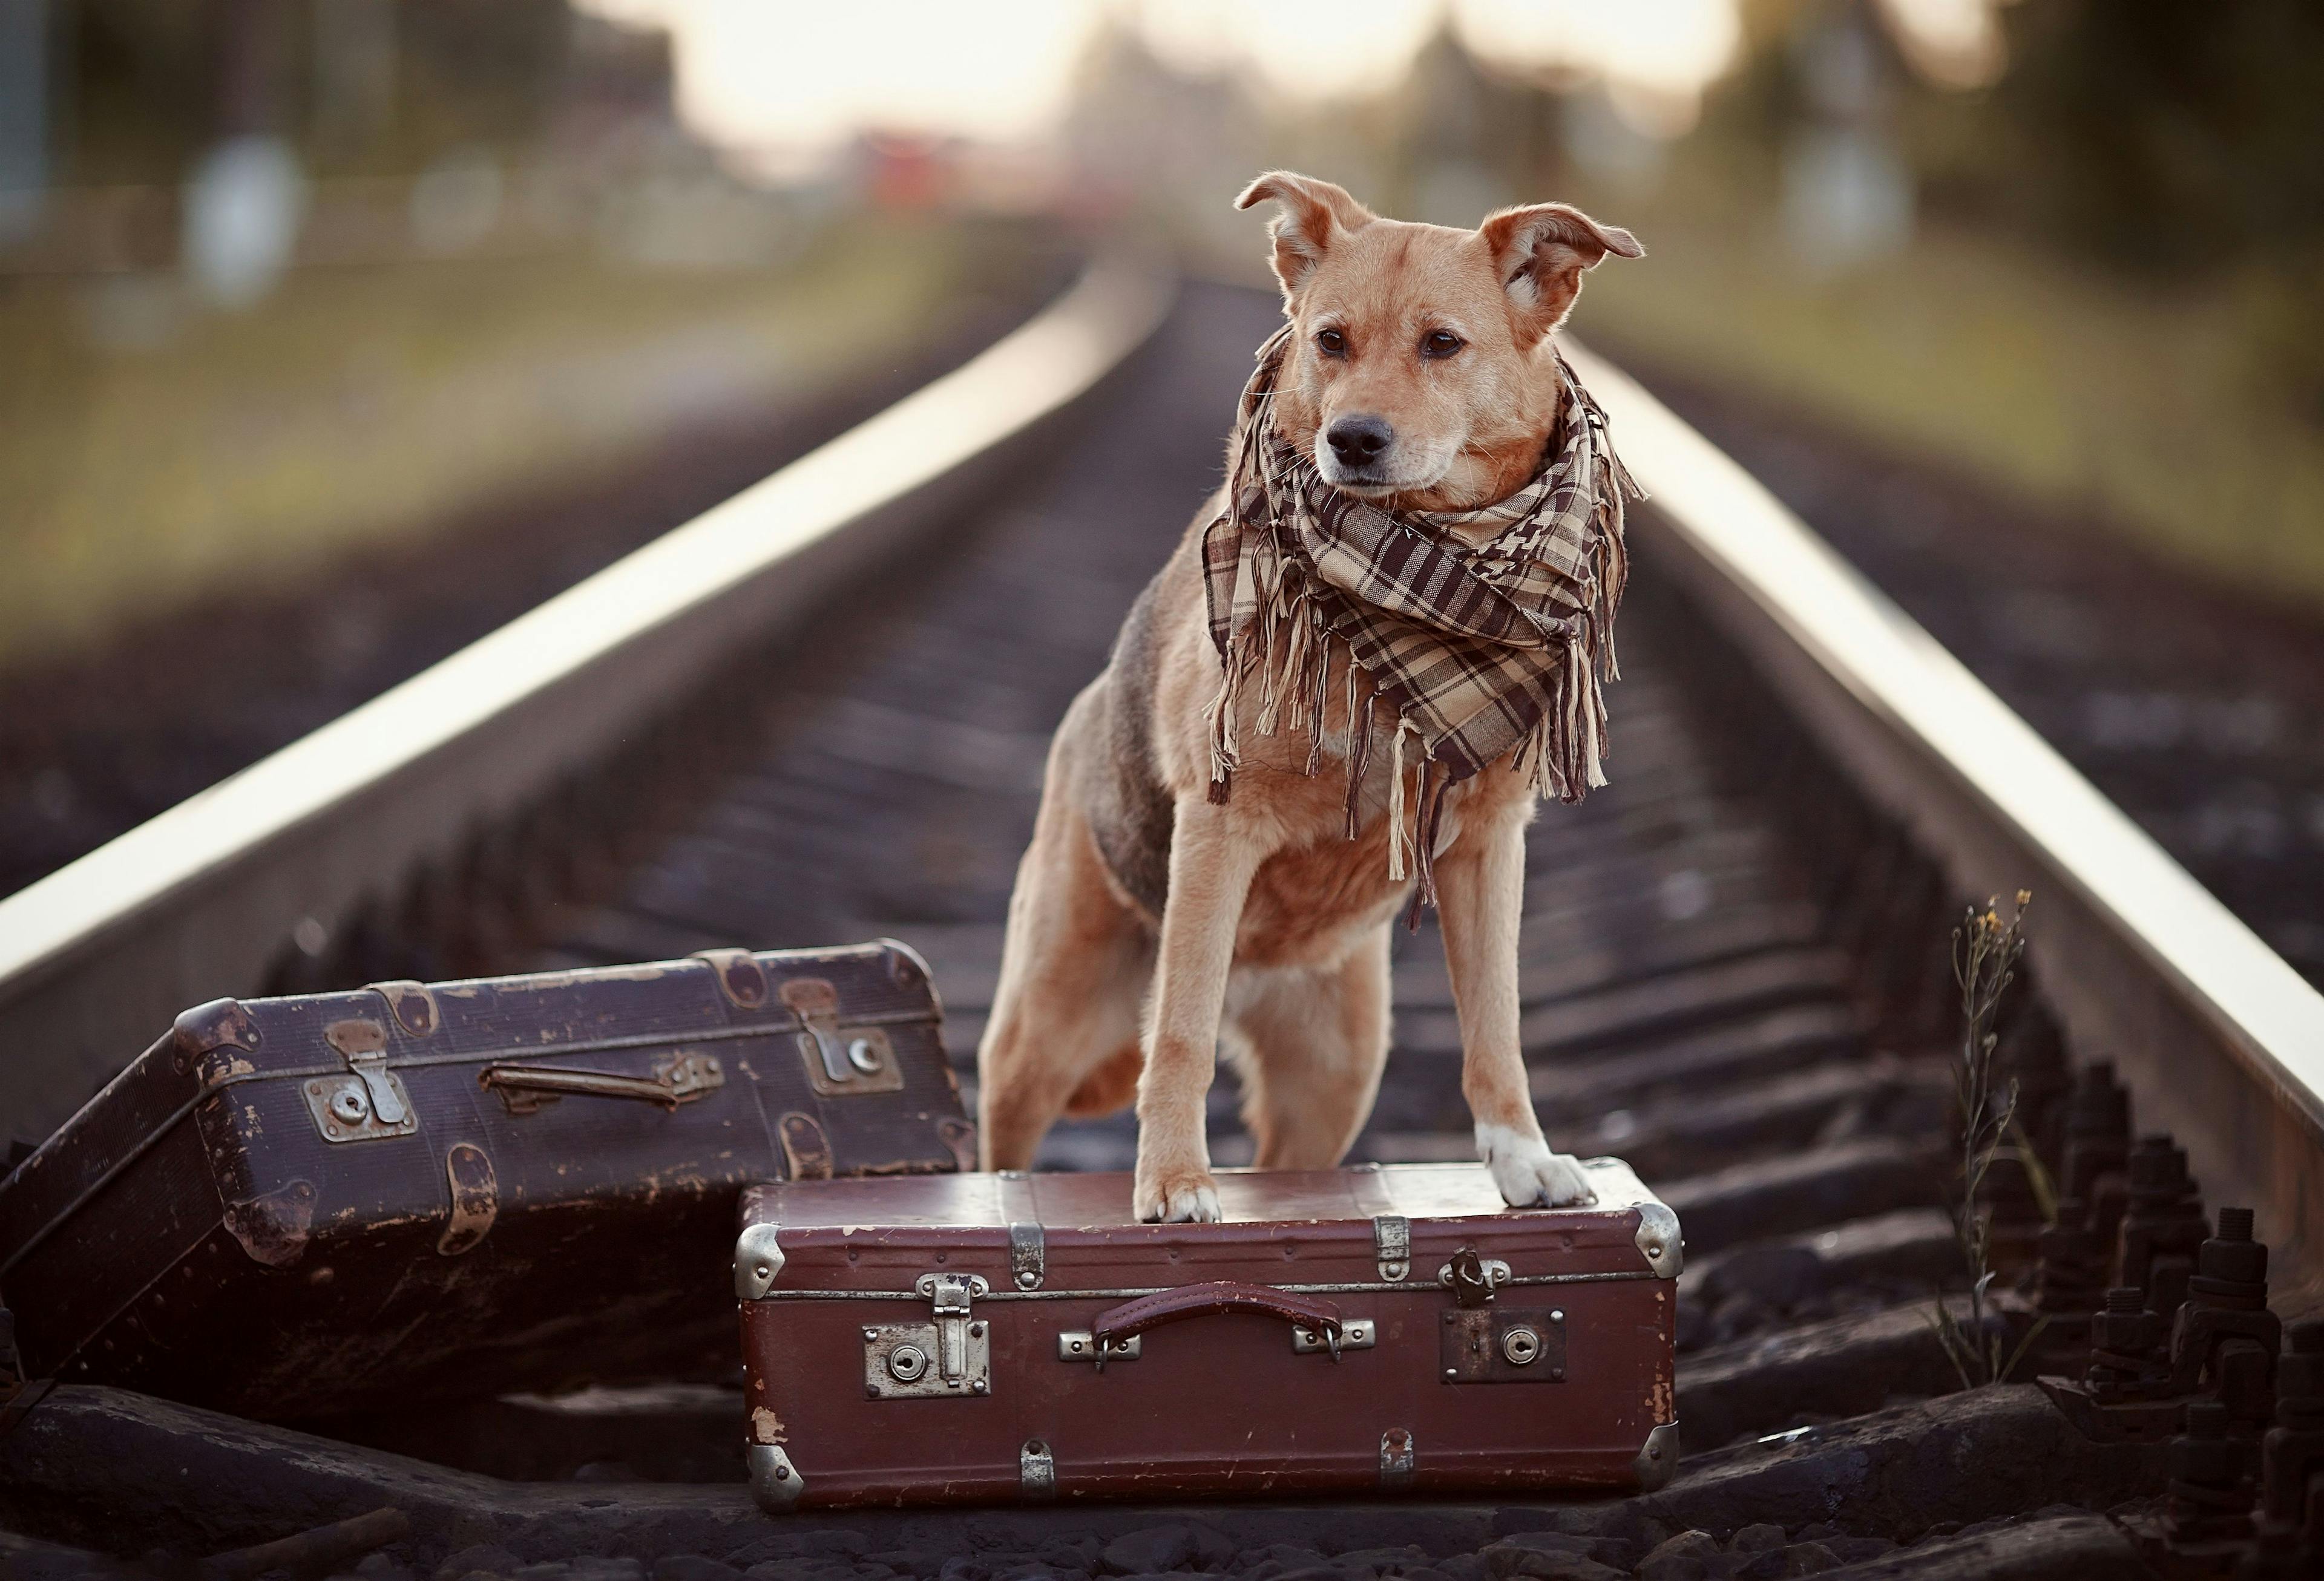 Travel with a dog